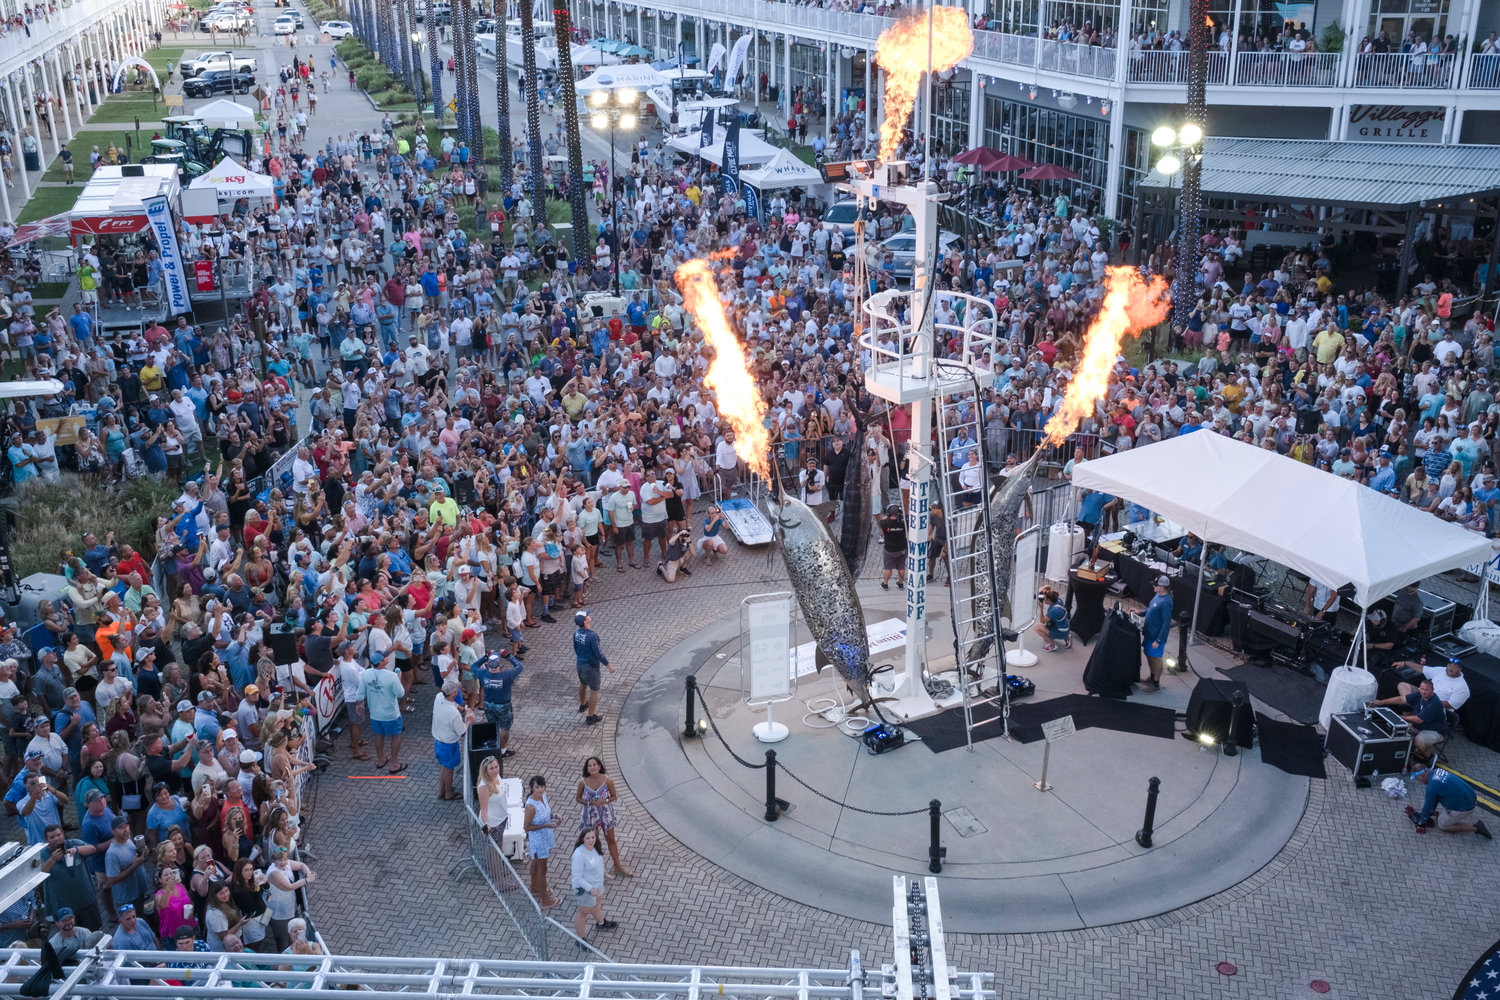 The 10th Blue Marlin Grand Championship filled The Wharf Saturday night, July 23.